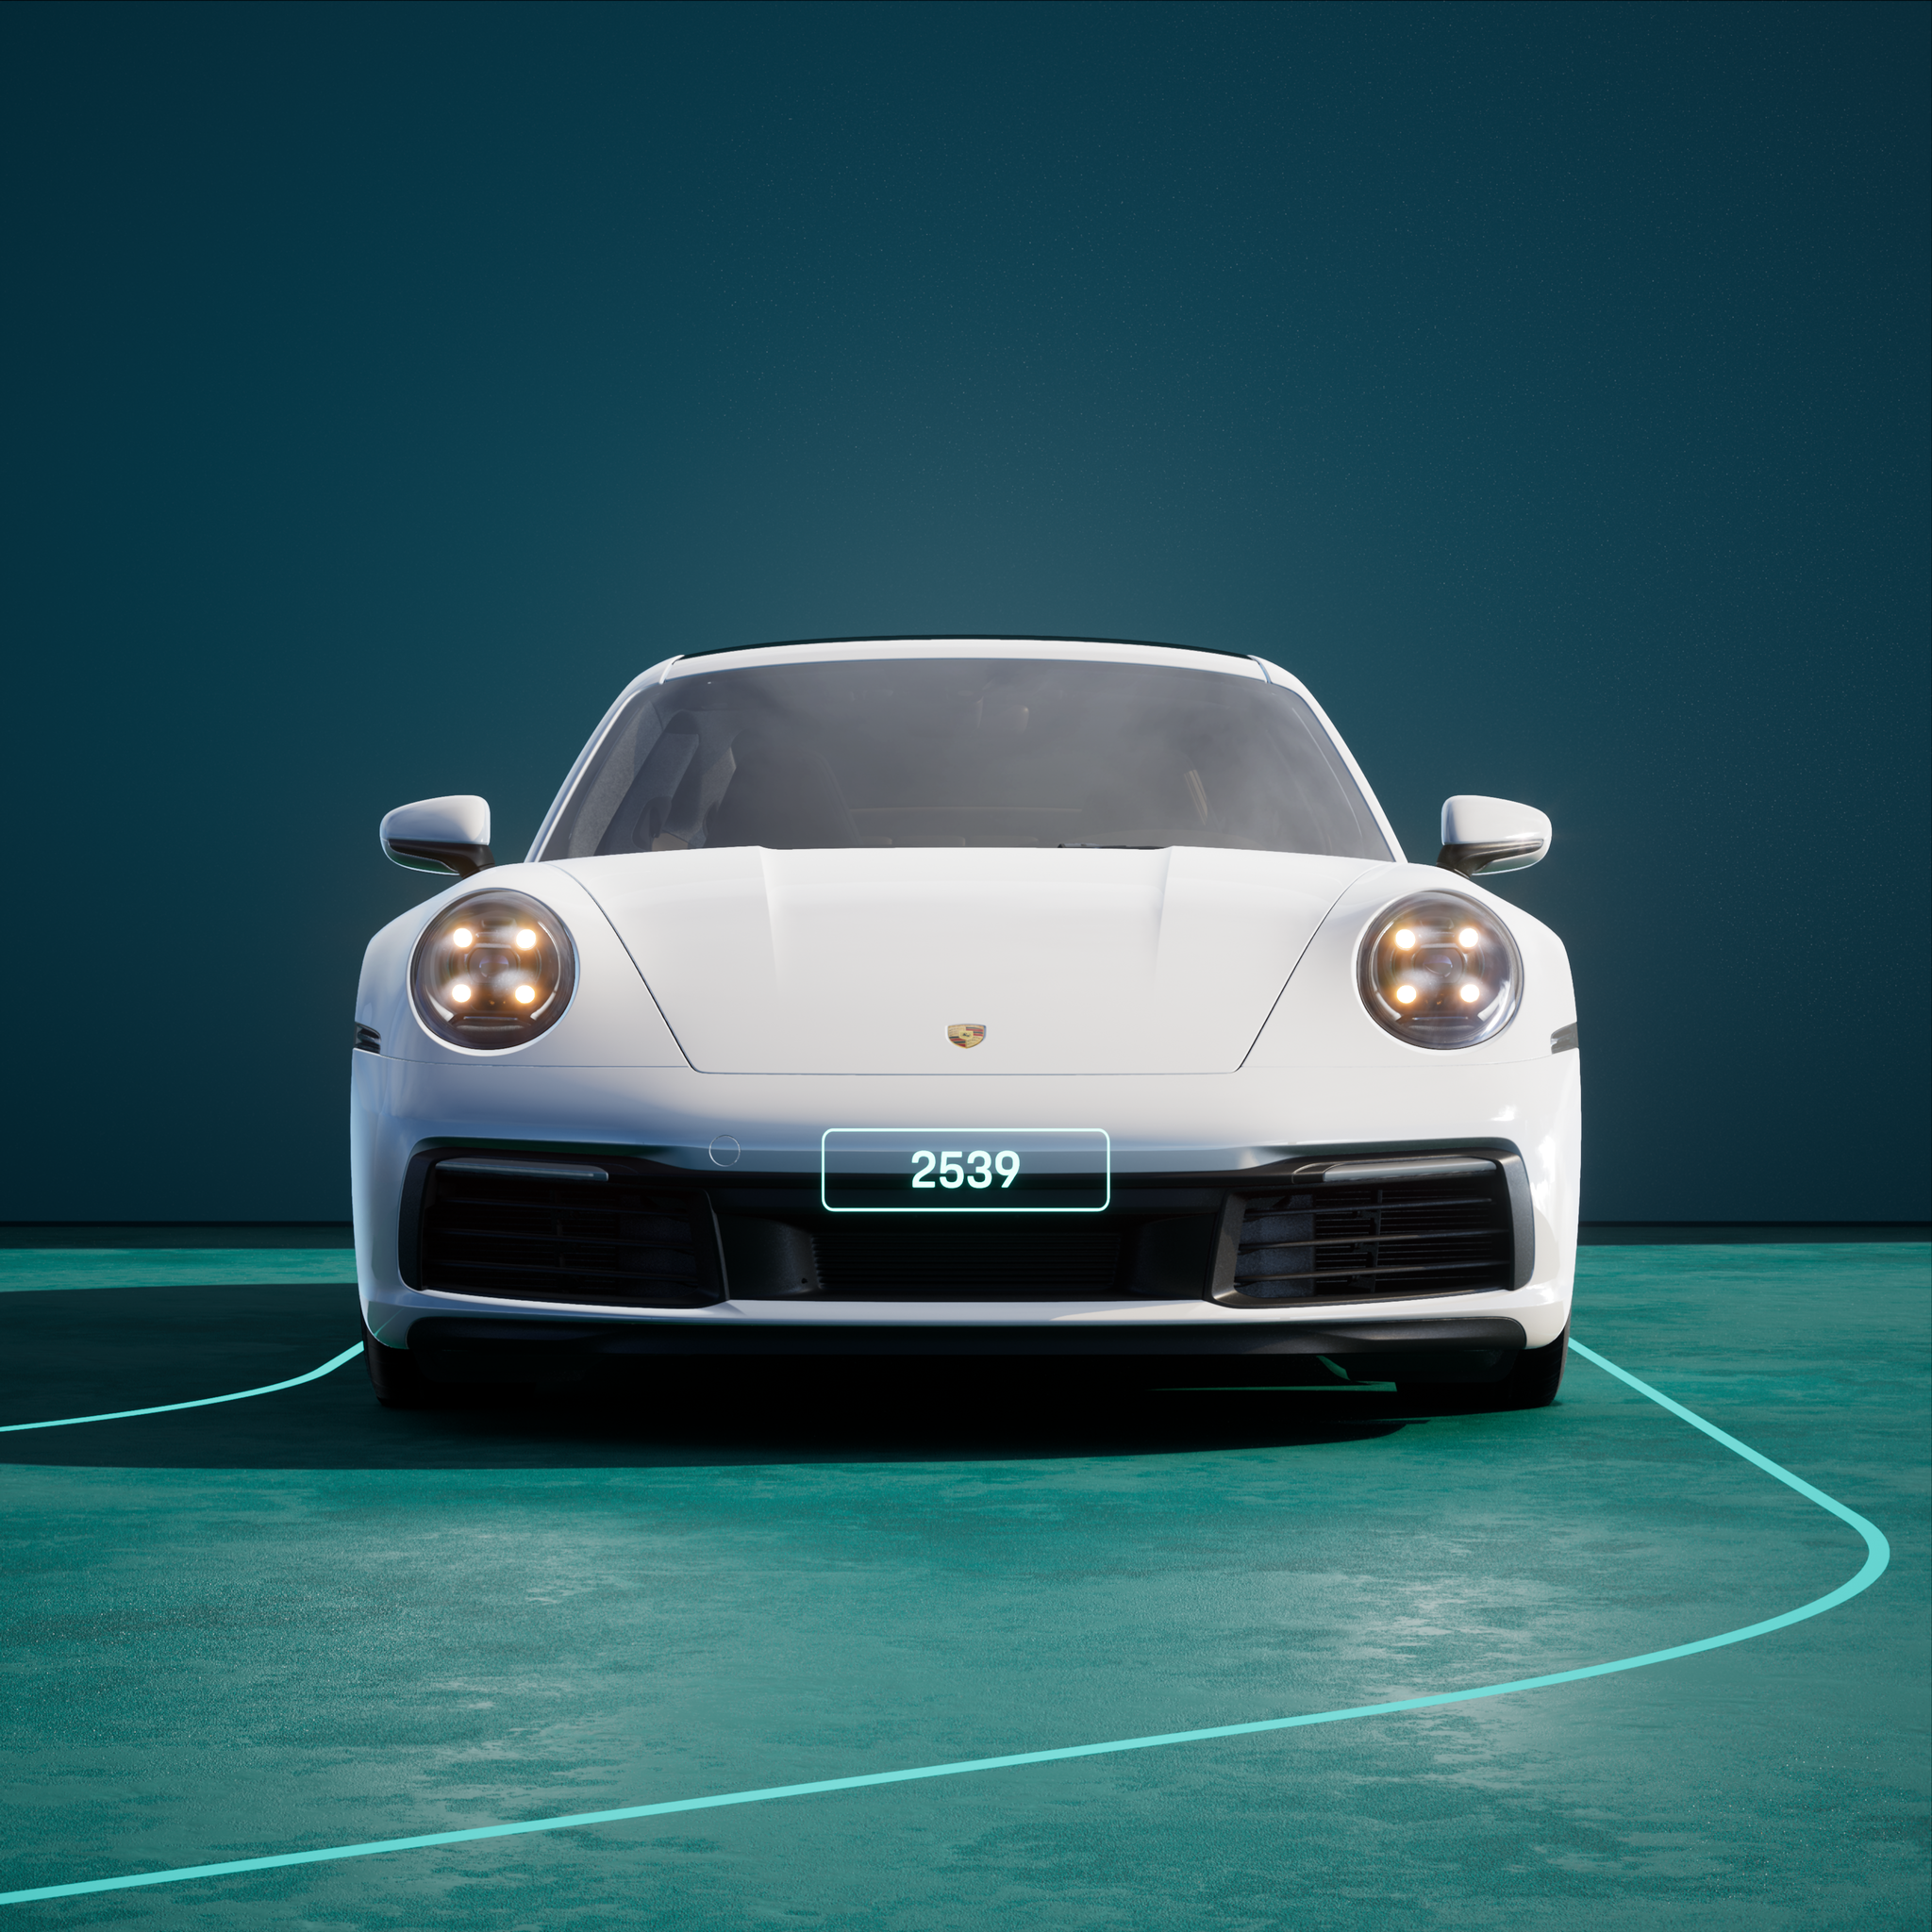 The PORSCHΞ 911 2539 image in phase